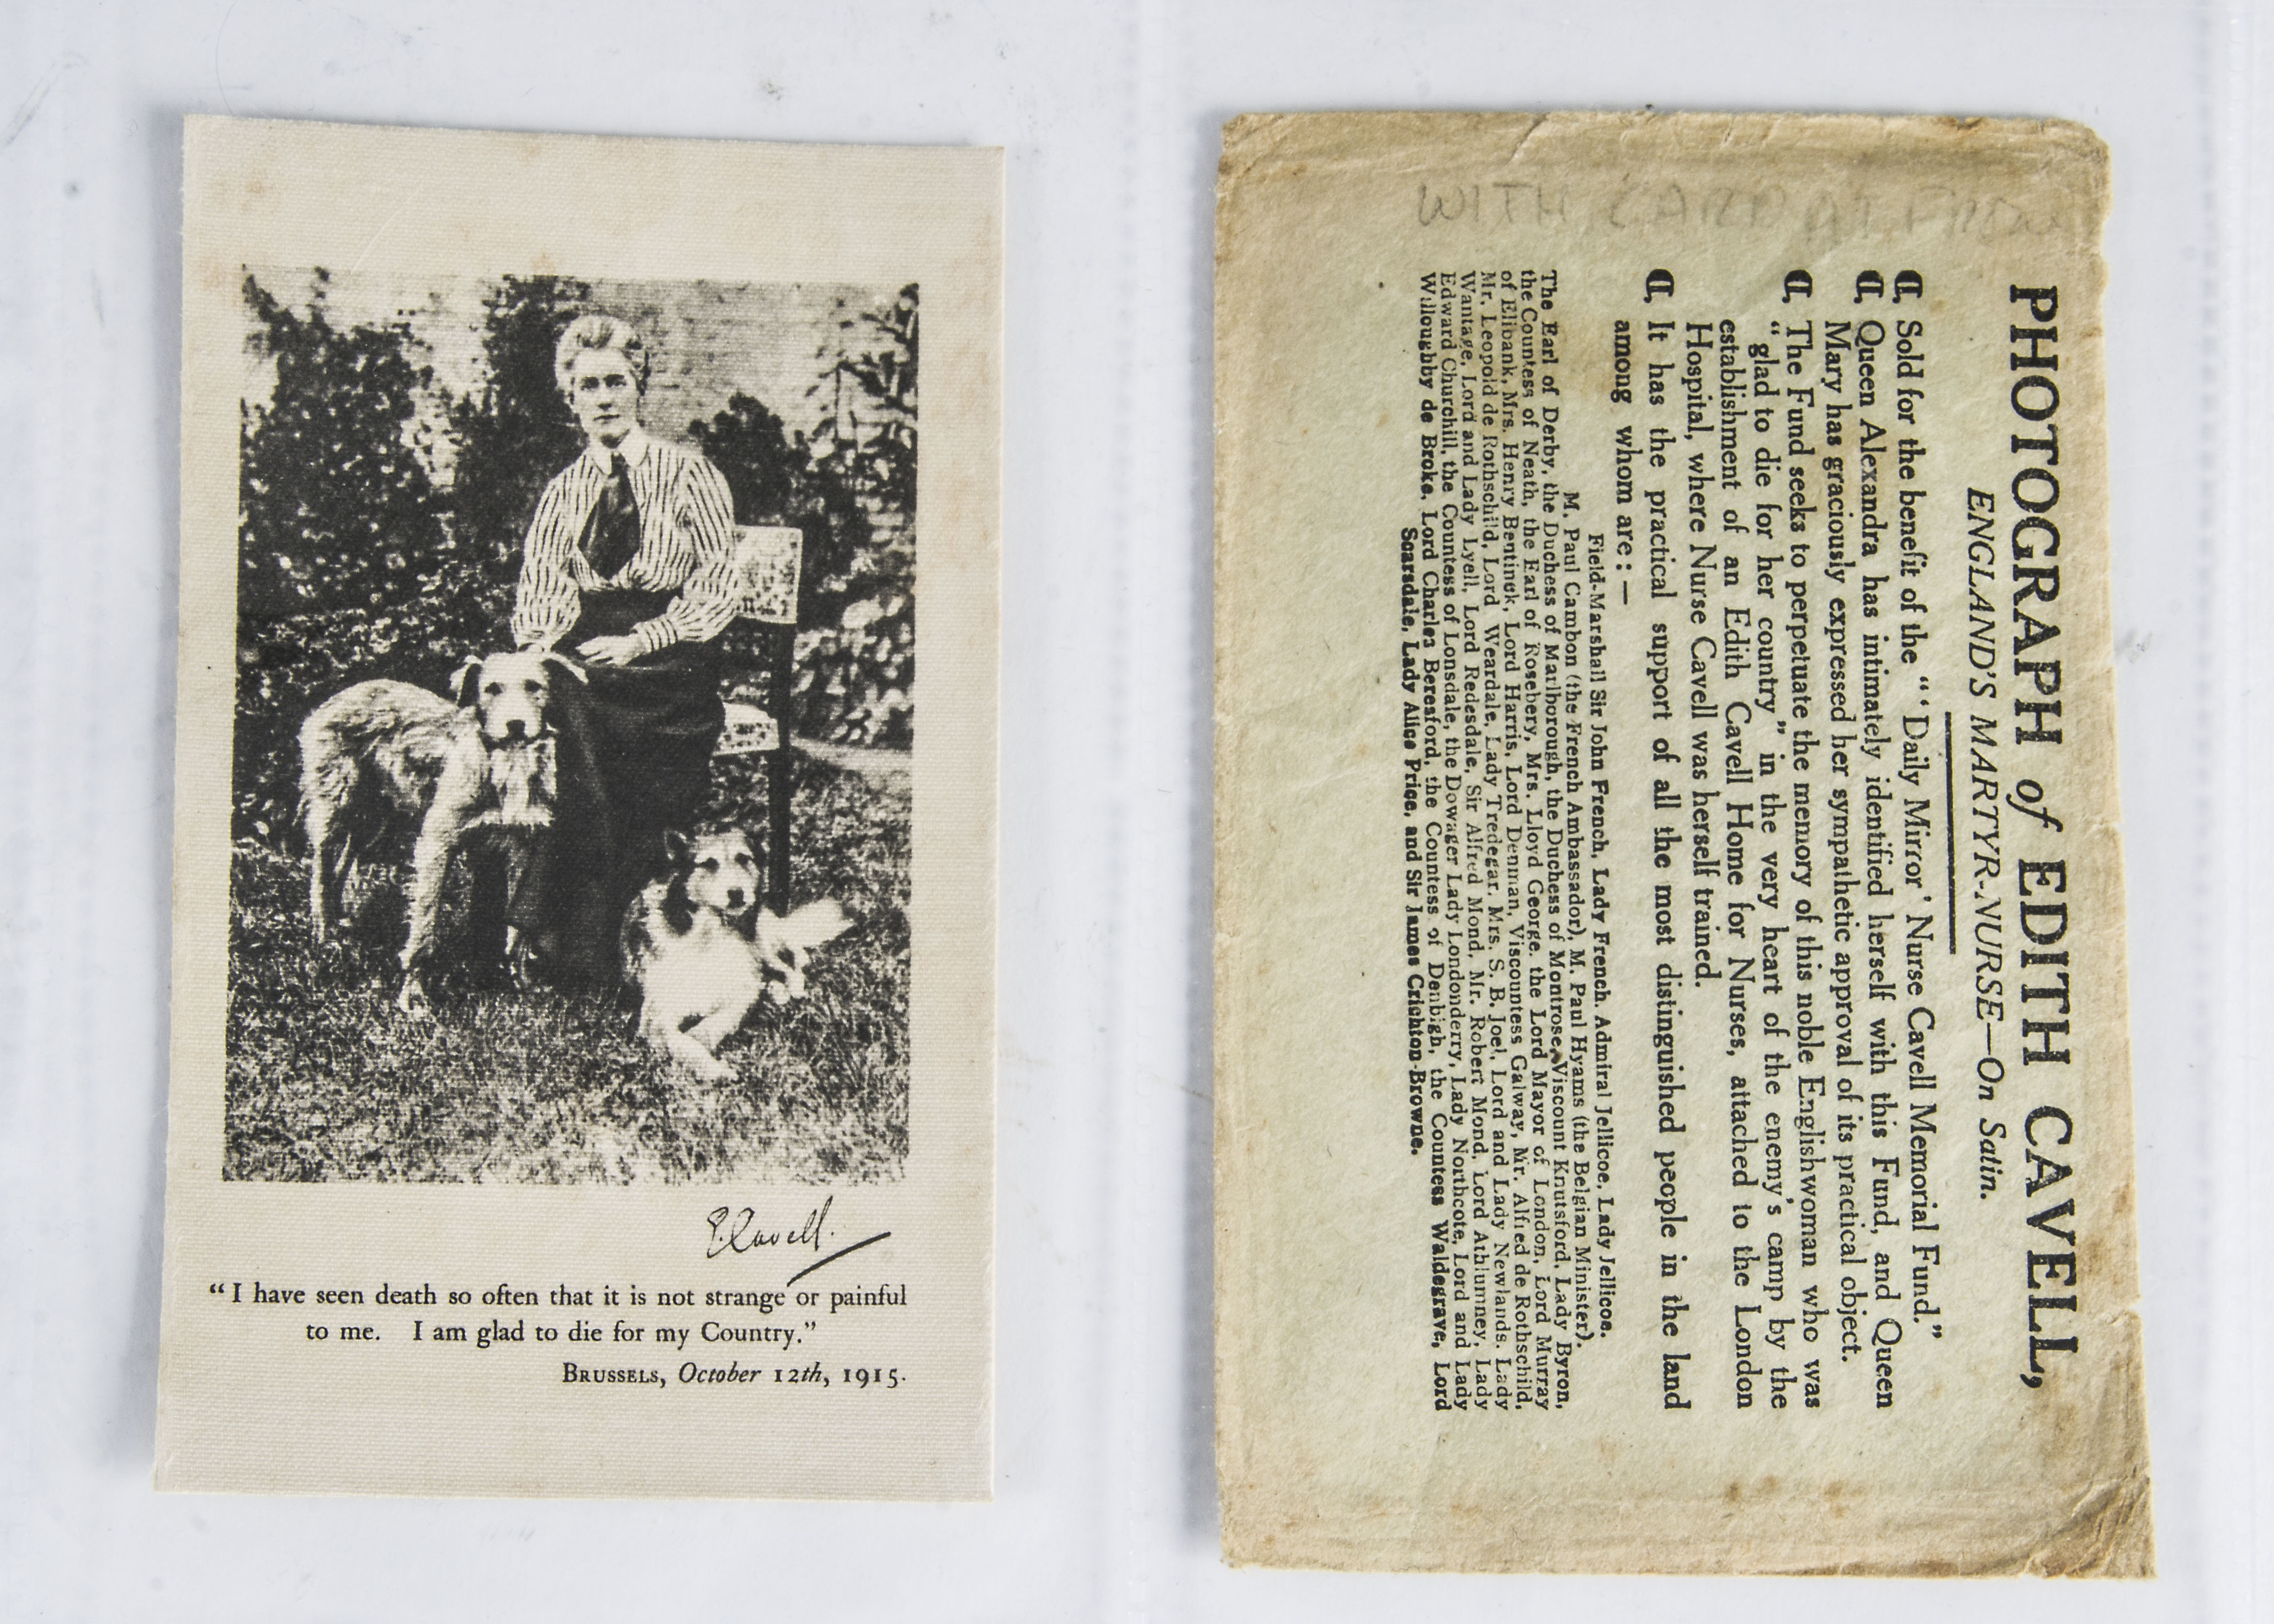 Trade Silk Postcard, WWI silk photograph of Edith Cavell, England's Martyr Nurse, dated Brussels